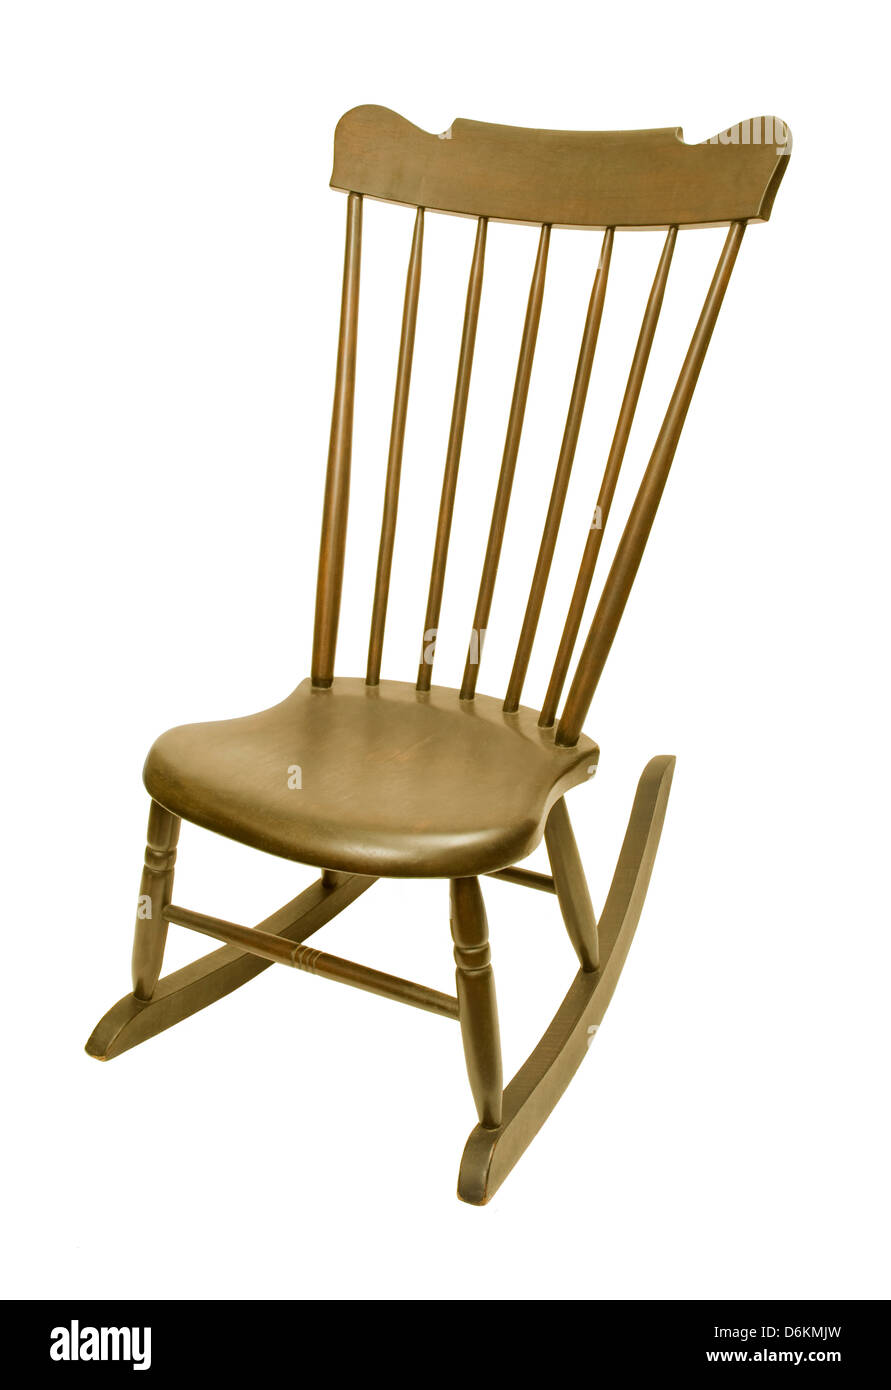 Vintage antique rocking chair against white background Stock Photo